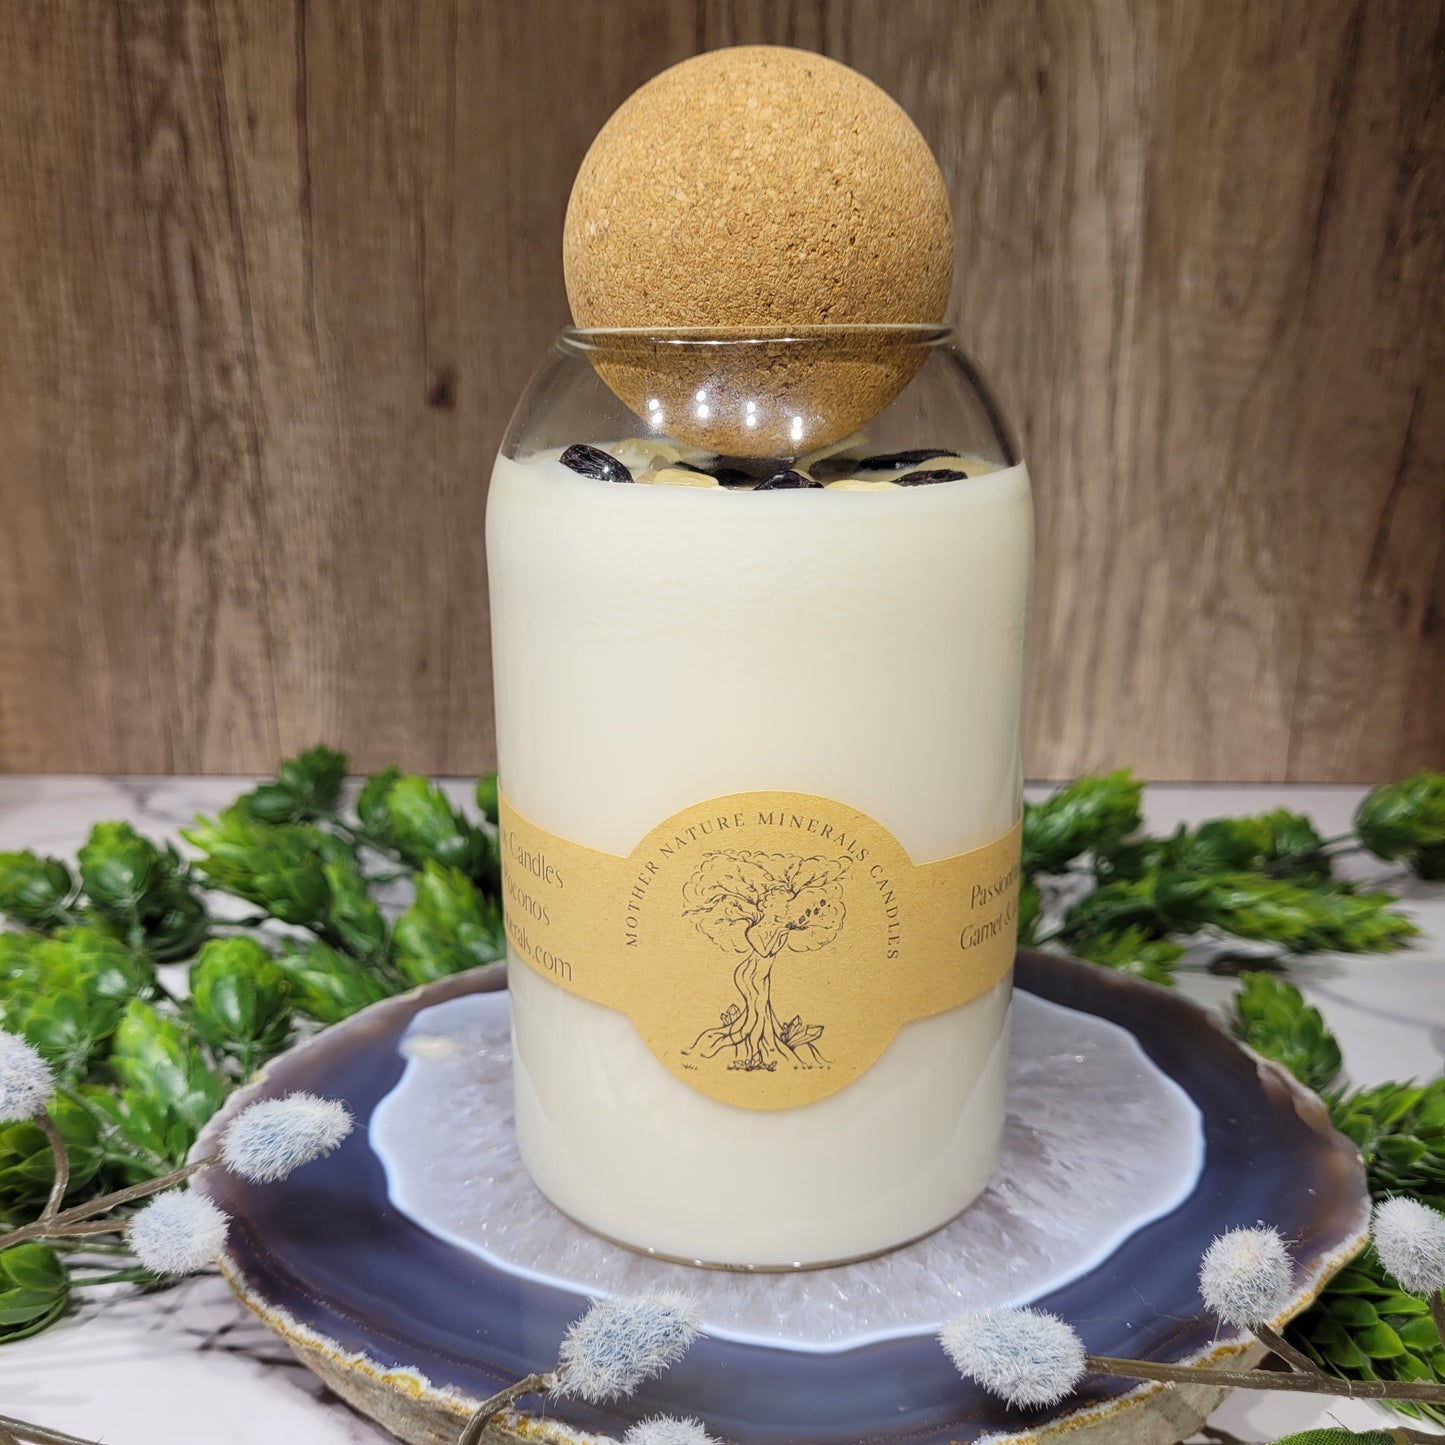 Passionfruit Pineapple Soy Candle